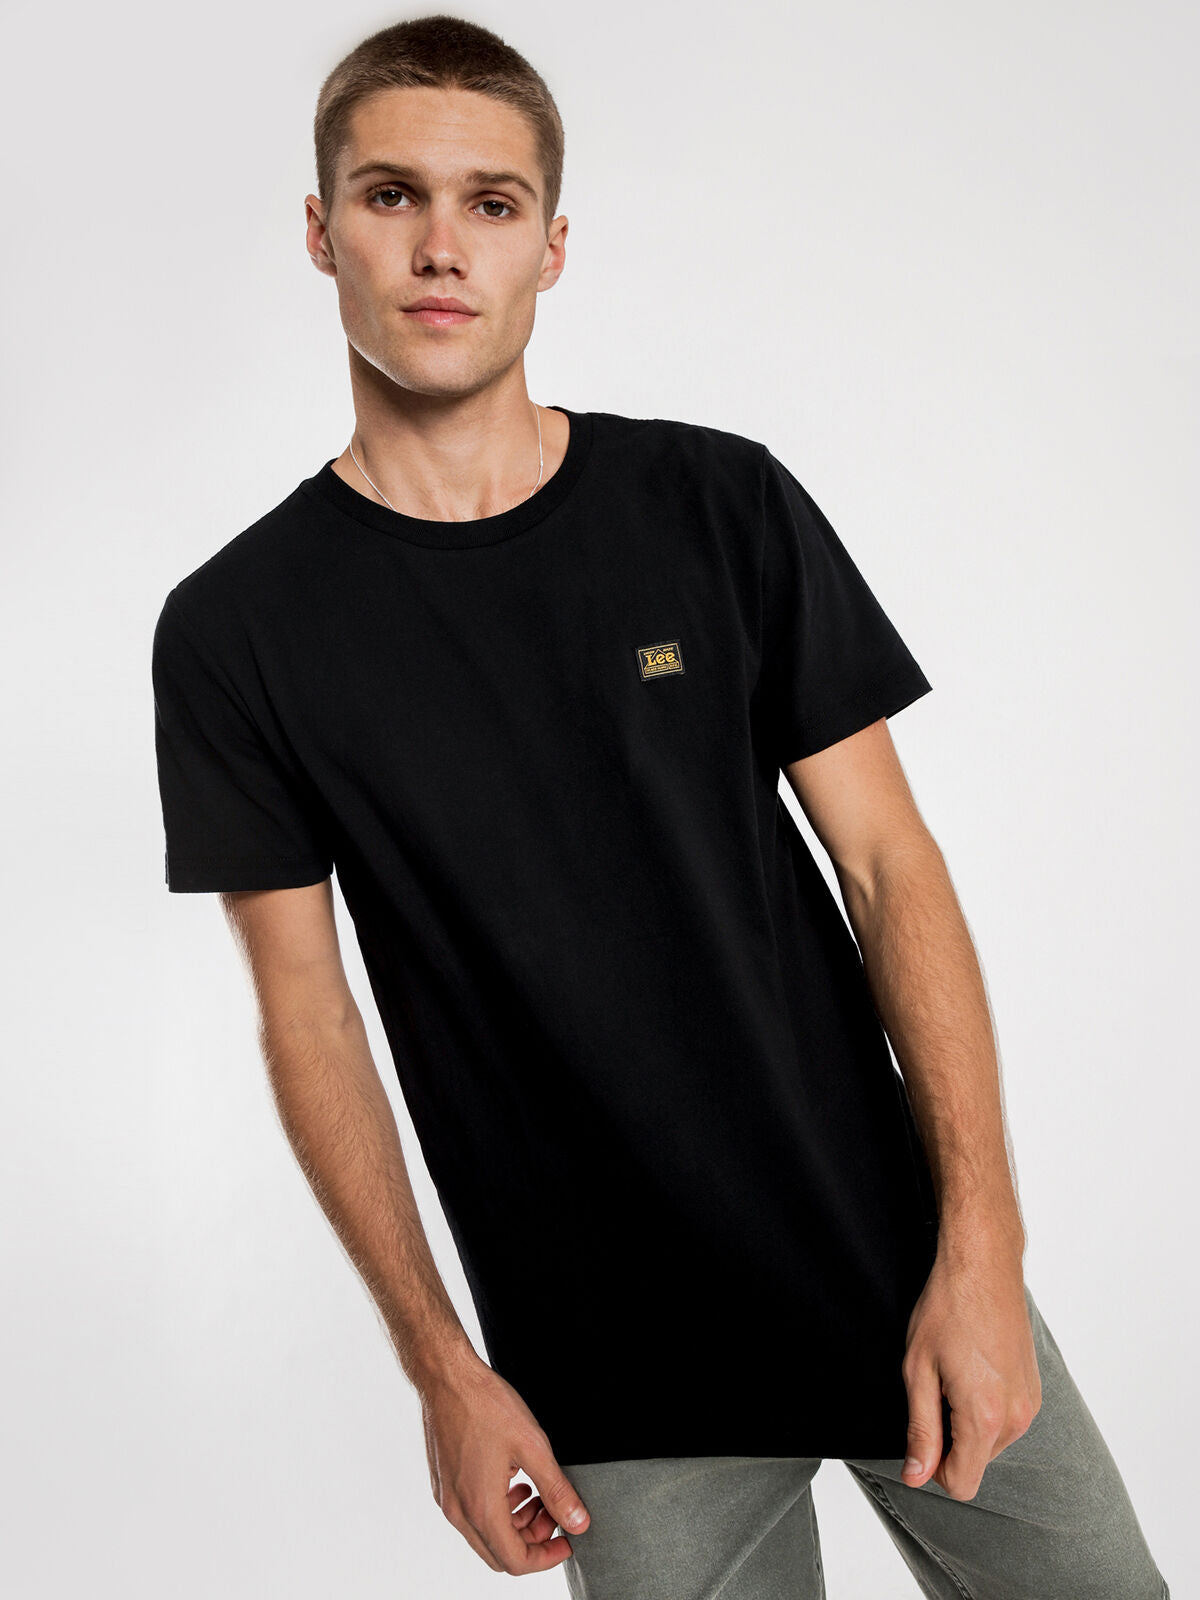 Relax T-Shirt in Black